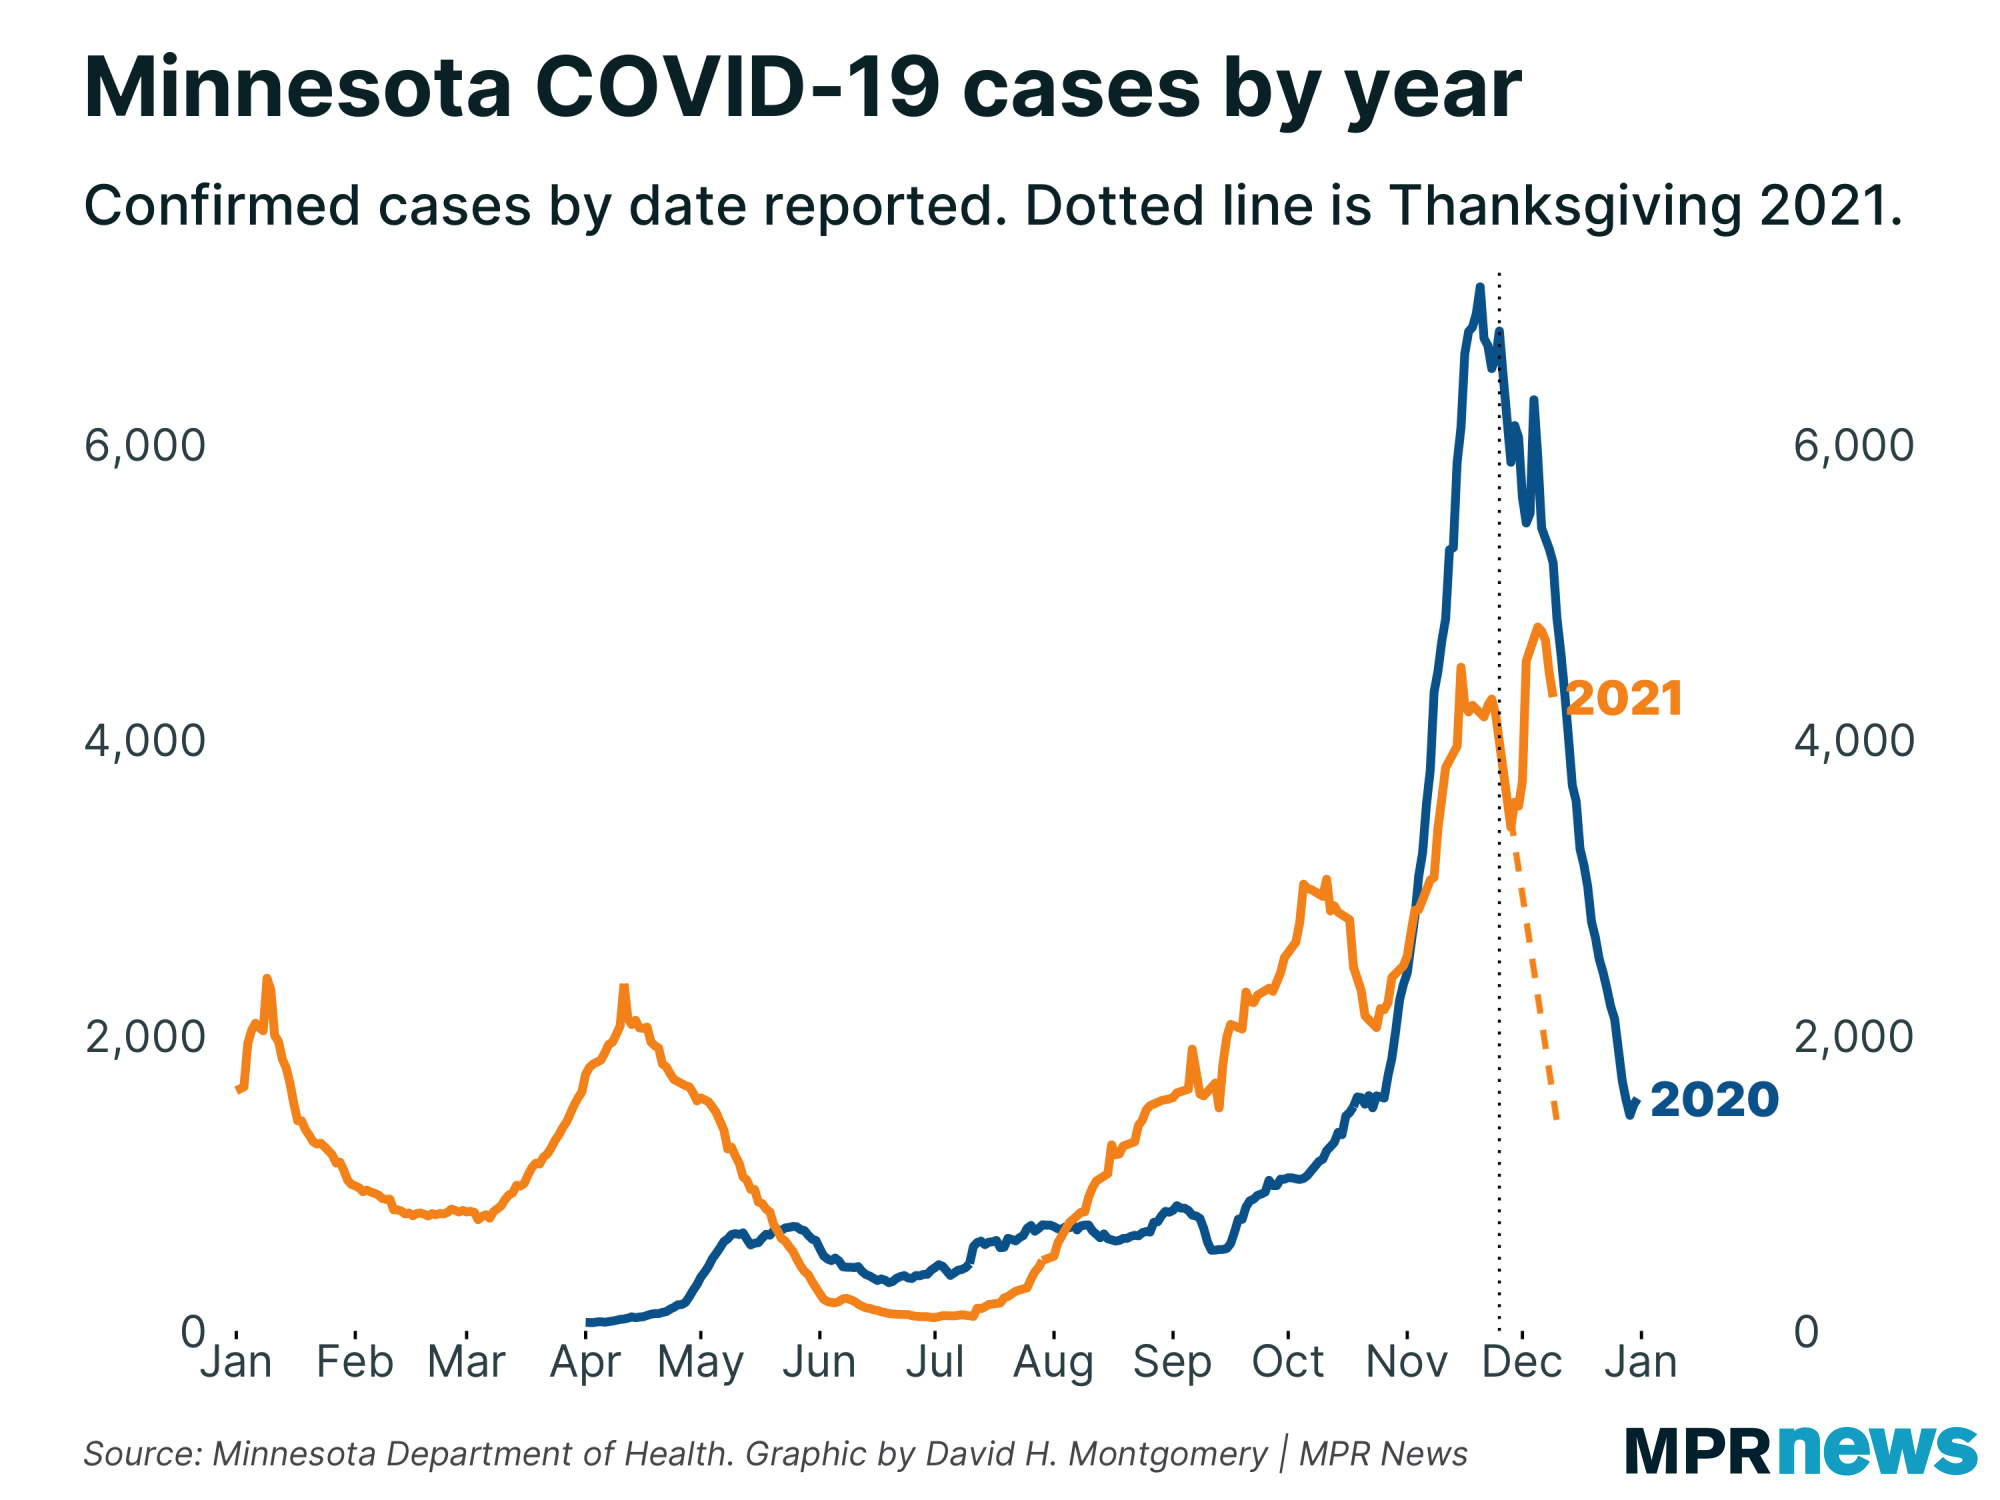 Graph of Minnesota's COVID-19 cases by year, annotated to extend the pre-Thanksgiving trend